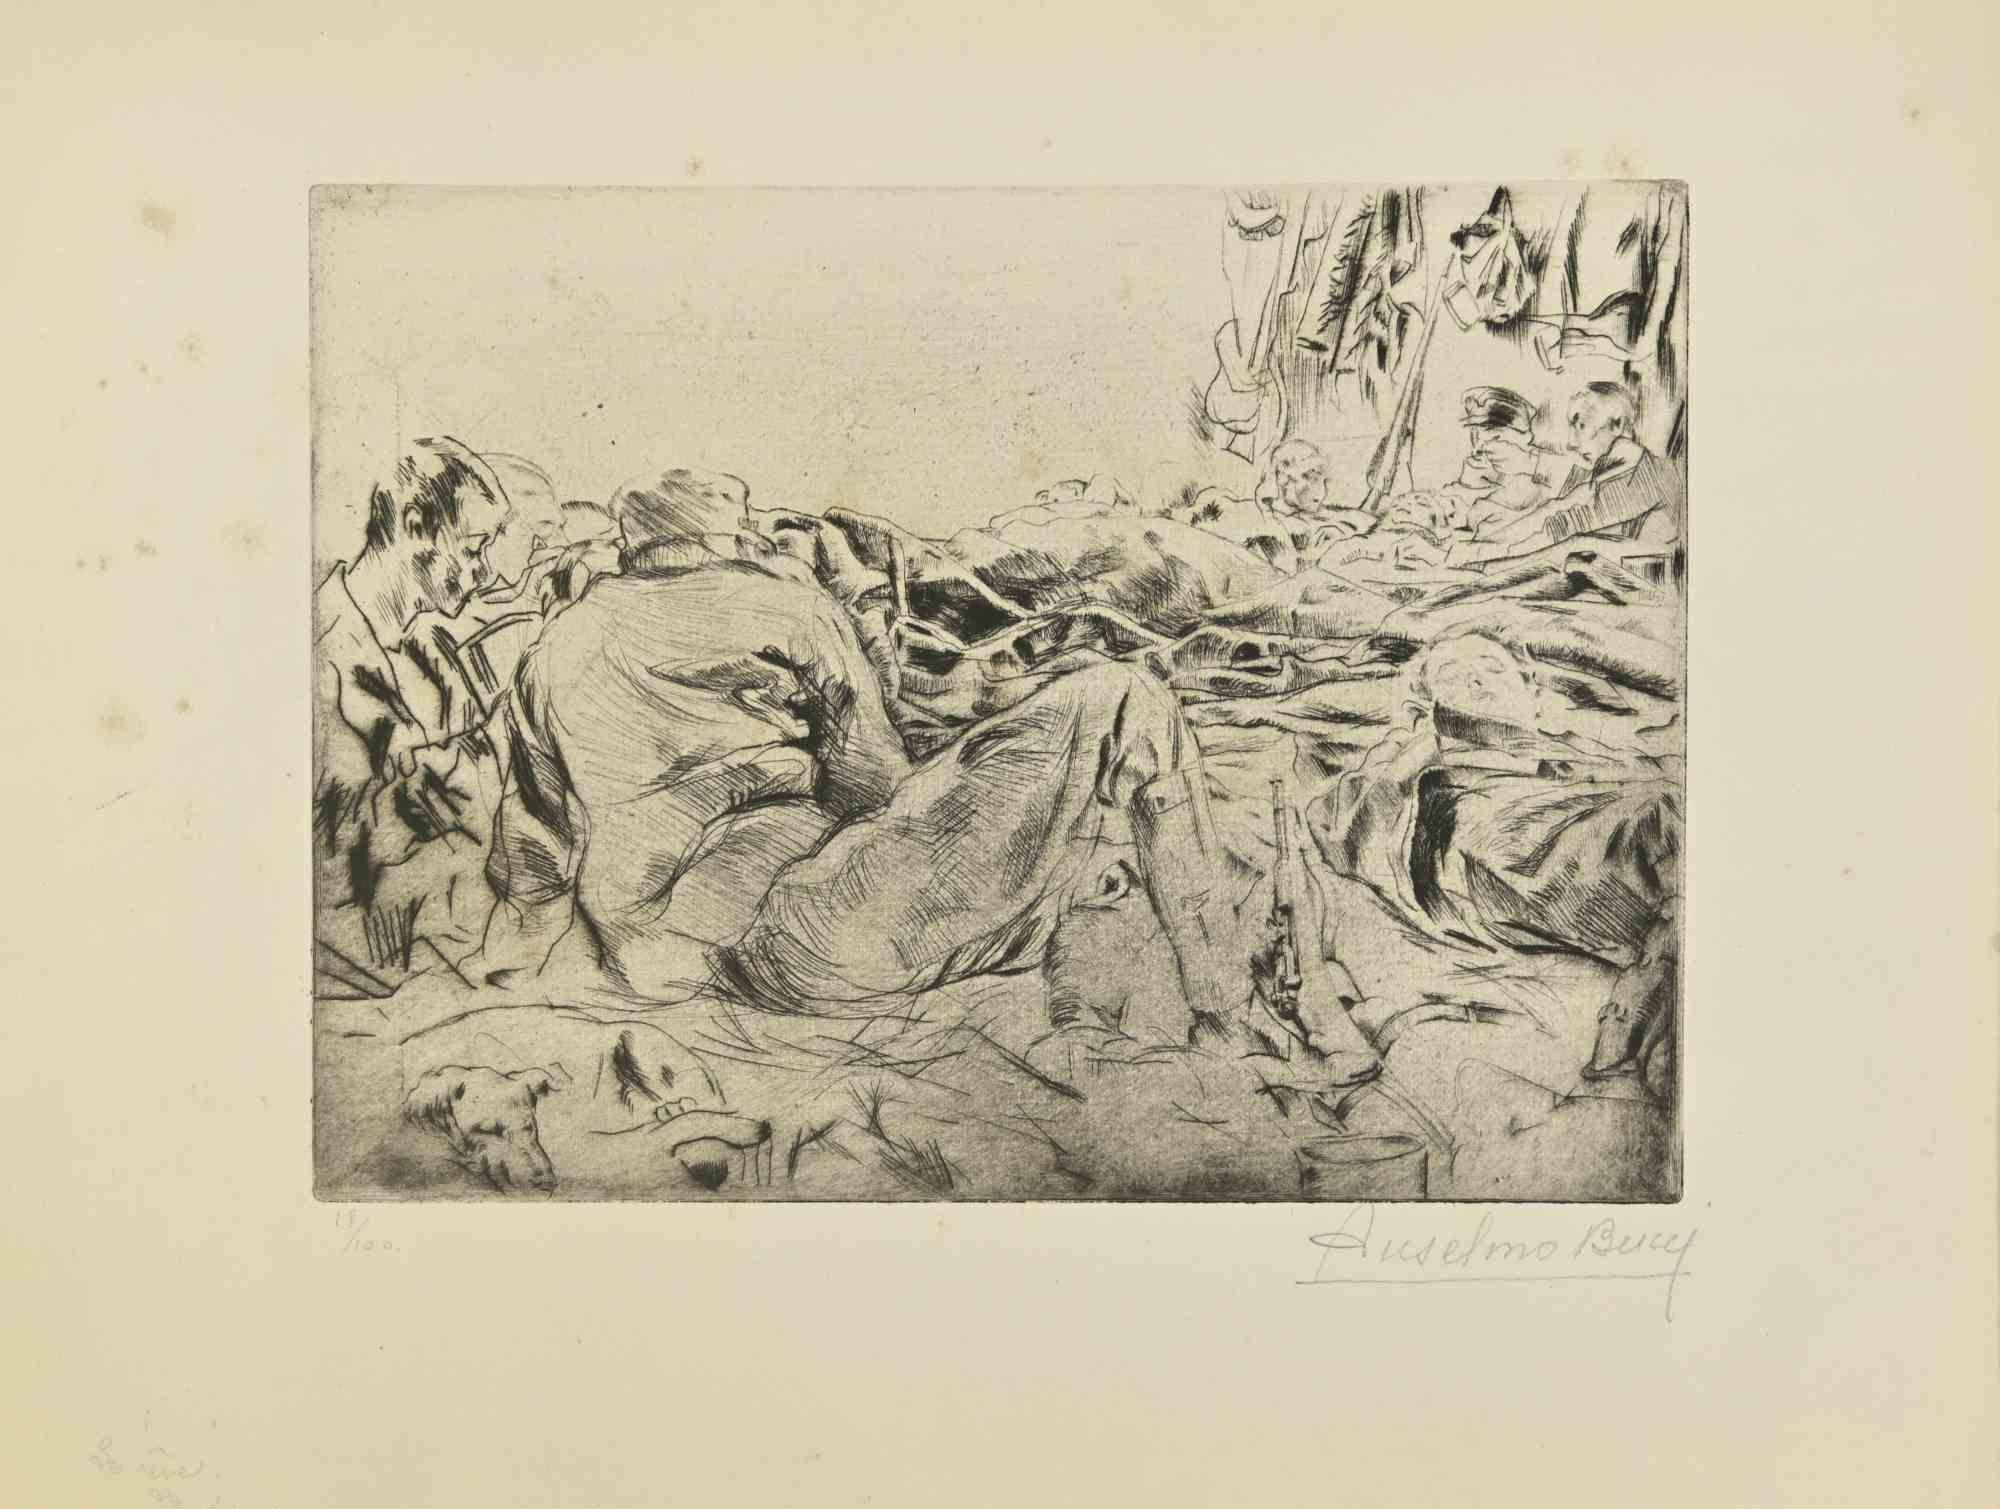 Le Rêve-from "Le Croquis du Front Italien" is an Artwork, Drypoint, realized by the Italian Artist Anselmo Bucci, in 1917.

Hand signed on the right margin . Edition n. 18/100 specimens on Hollande paper. From the collection: “Croquis du Front